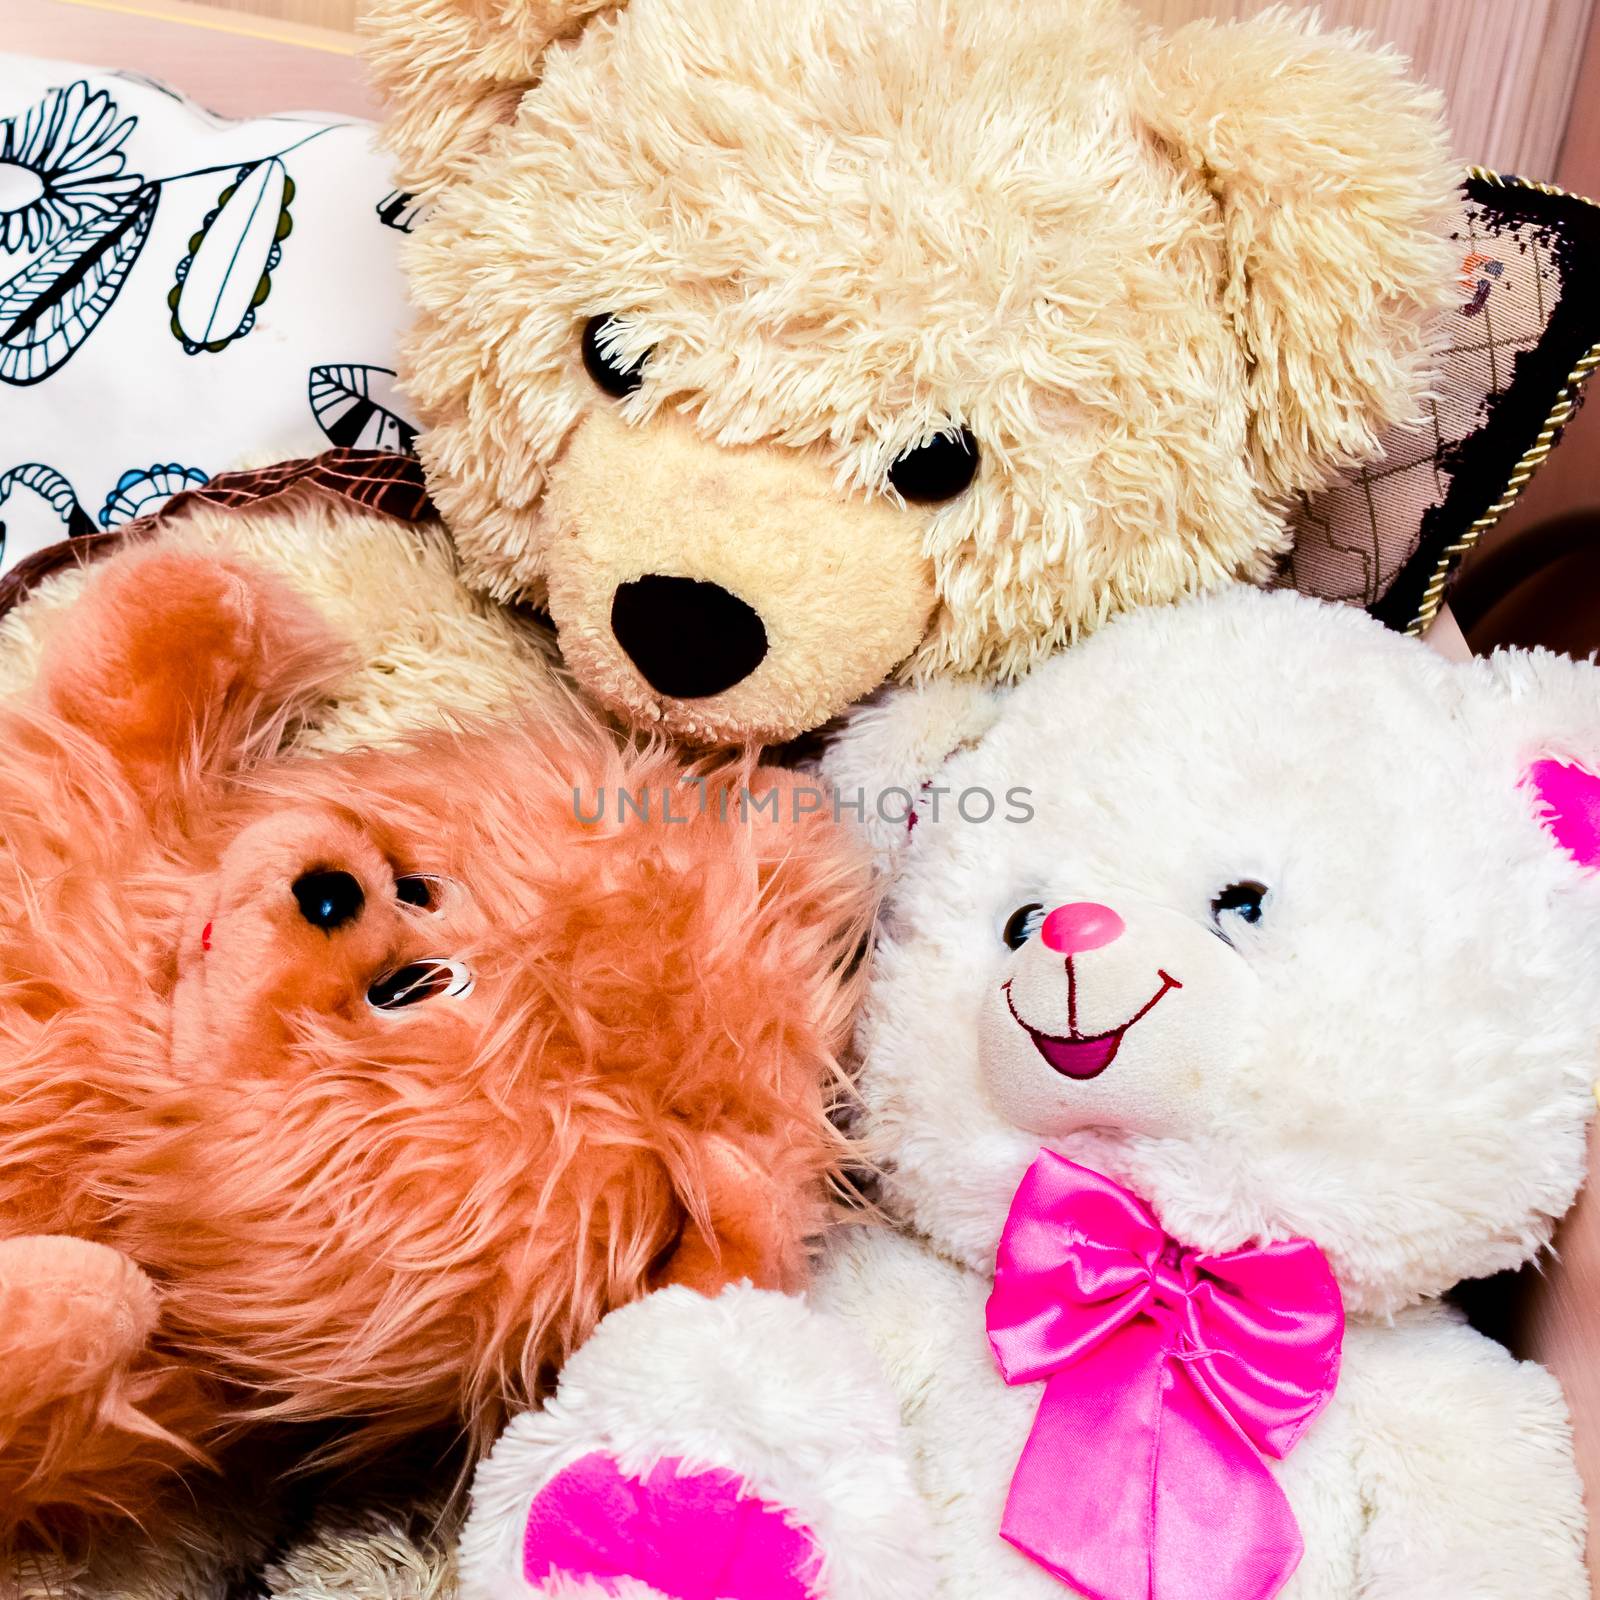 bright colored soft toys in a messy situation by alexandr_sorokin